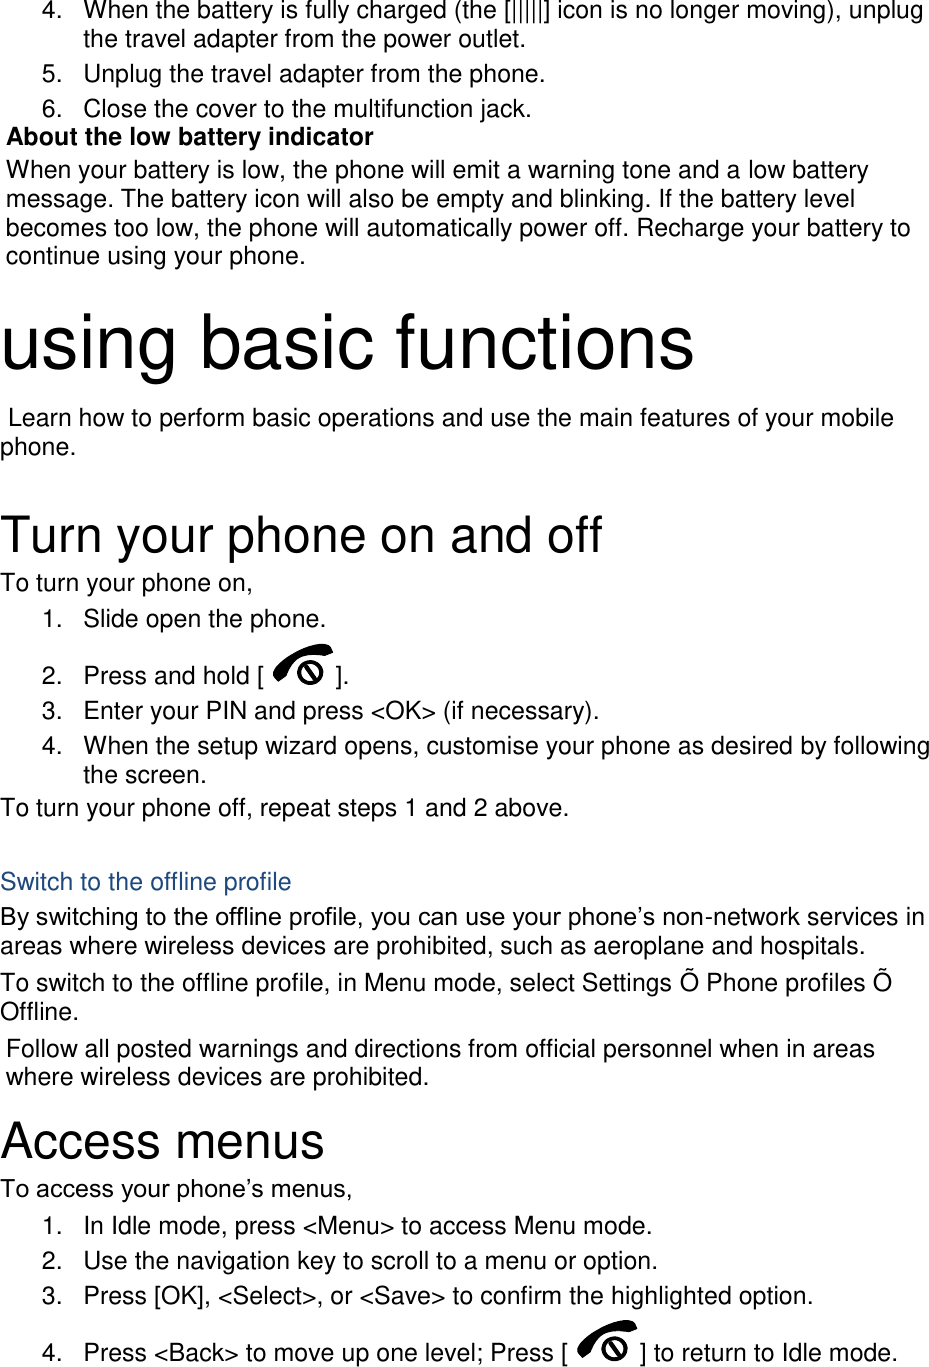 4.  When the battery is fully charged (the [|||||] icon is no longer moving), unplug the travel adapter from the power outlet. 5.  Unplug the travel adapter from the phone. 6.  Close the cover to the multifunction jack. About the low battery indicator When your battery is low, the phone will emit a warning tone and a low battery message. The battery icon will also be empty and blinking. If the battery level becomes too low, the phone will automatically power off. Recharge your battery to continue using your phone.  using basic functions  Learn how to perform basic operations and use the main features of your mobile phone.    Turn your phone on and off To turn your phone on, 1.  Slide open the phone. 2.  Press and hold [ ]. 3.  Enter your PIN and press &lt;OK&gt; (if necessary). 4.  When the setup wizard opens, customise your phone as desired by following the screen. To turn your phone off, repeat steps 1 and 2 above.  Switch to the offline profile By switching to the offline profile, you can use your phone’s non-network services in areas where wireless devices are prohibited, such as aeroplane and hospitals. To switch to the offline profile, in Menu mode, select Settings Õ Phone profiles Õ Offline. Follow all posted warnings and directions from official personnel when in areas where wireless devices are prohibited. Access menus To access your phone’s menus, 1.  In Idle mode, press &lt;Menu&gt; to access Menu mode. 2.  Use the navigation key to scroll to a menu or option. 3.  Press [OK], &lt;Select&gt;, or &lt;Save&gt; to confirm the highlighted option. 4.  Press &lt;Back&gt; to move up one level; Press [ ] to return to Idle mode. 